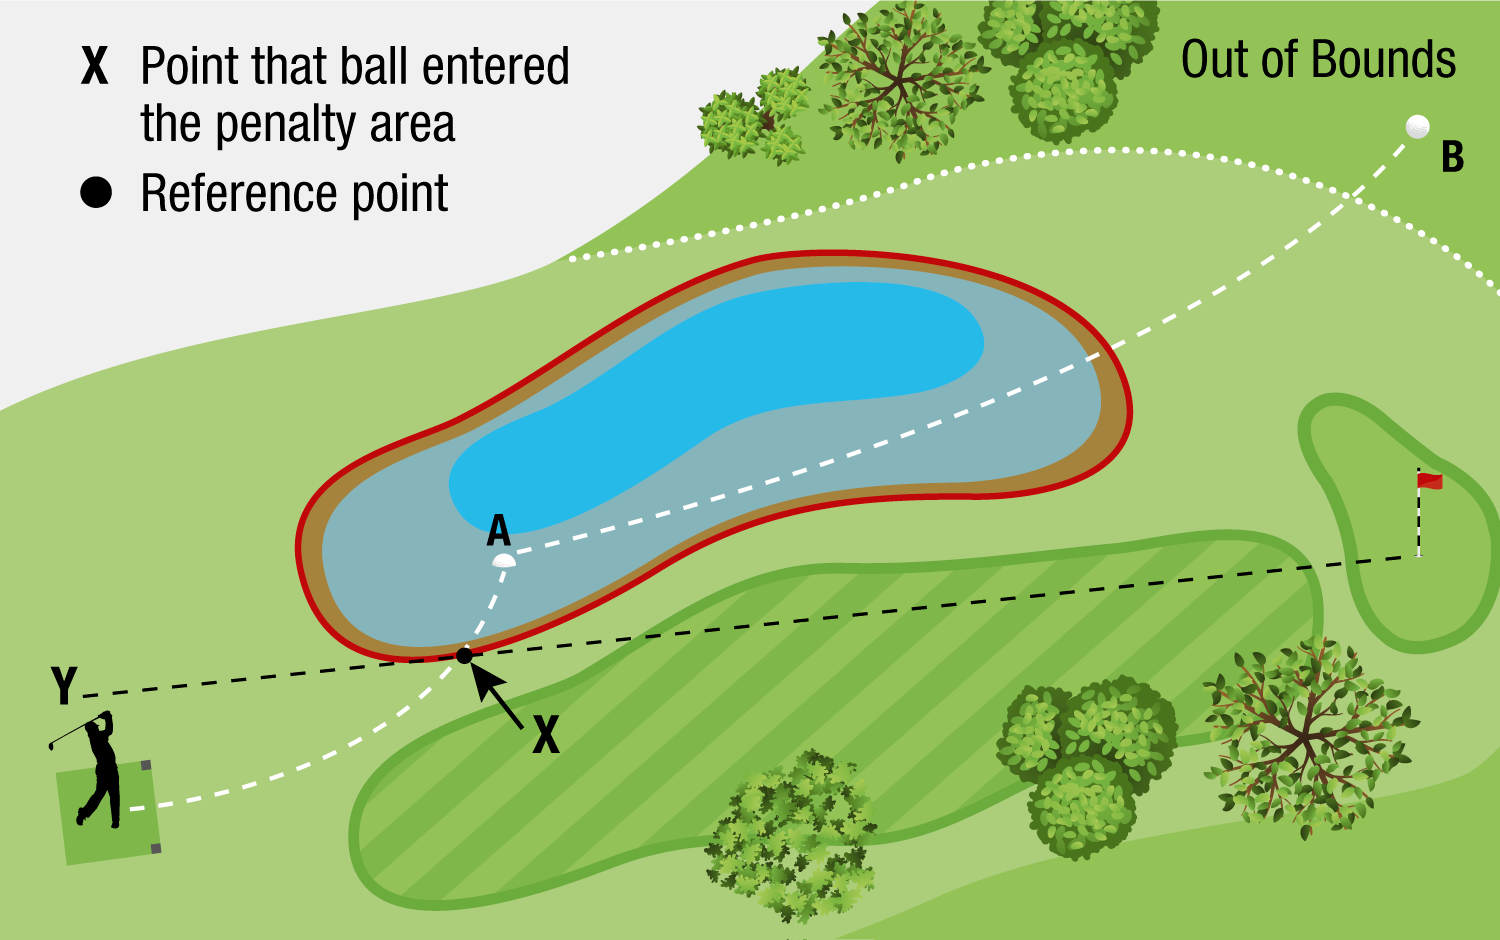 There are OB lines and zones., About Rules, About Park Golf